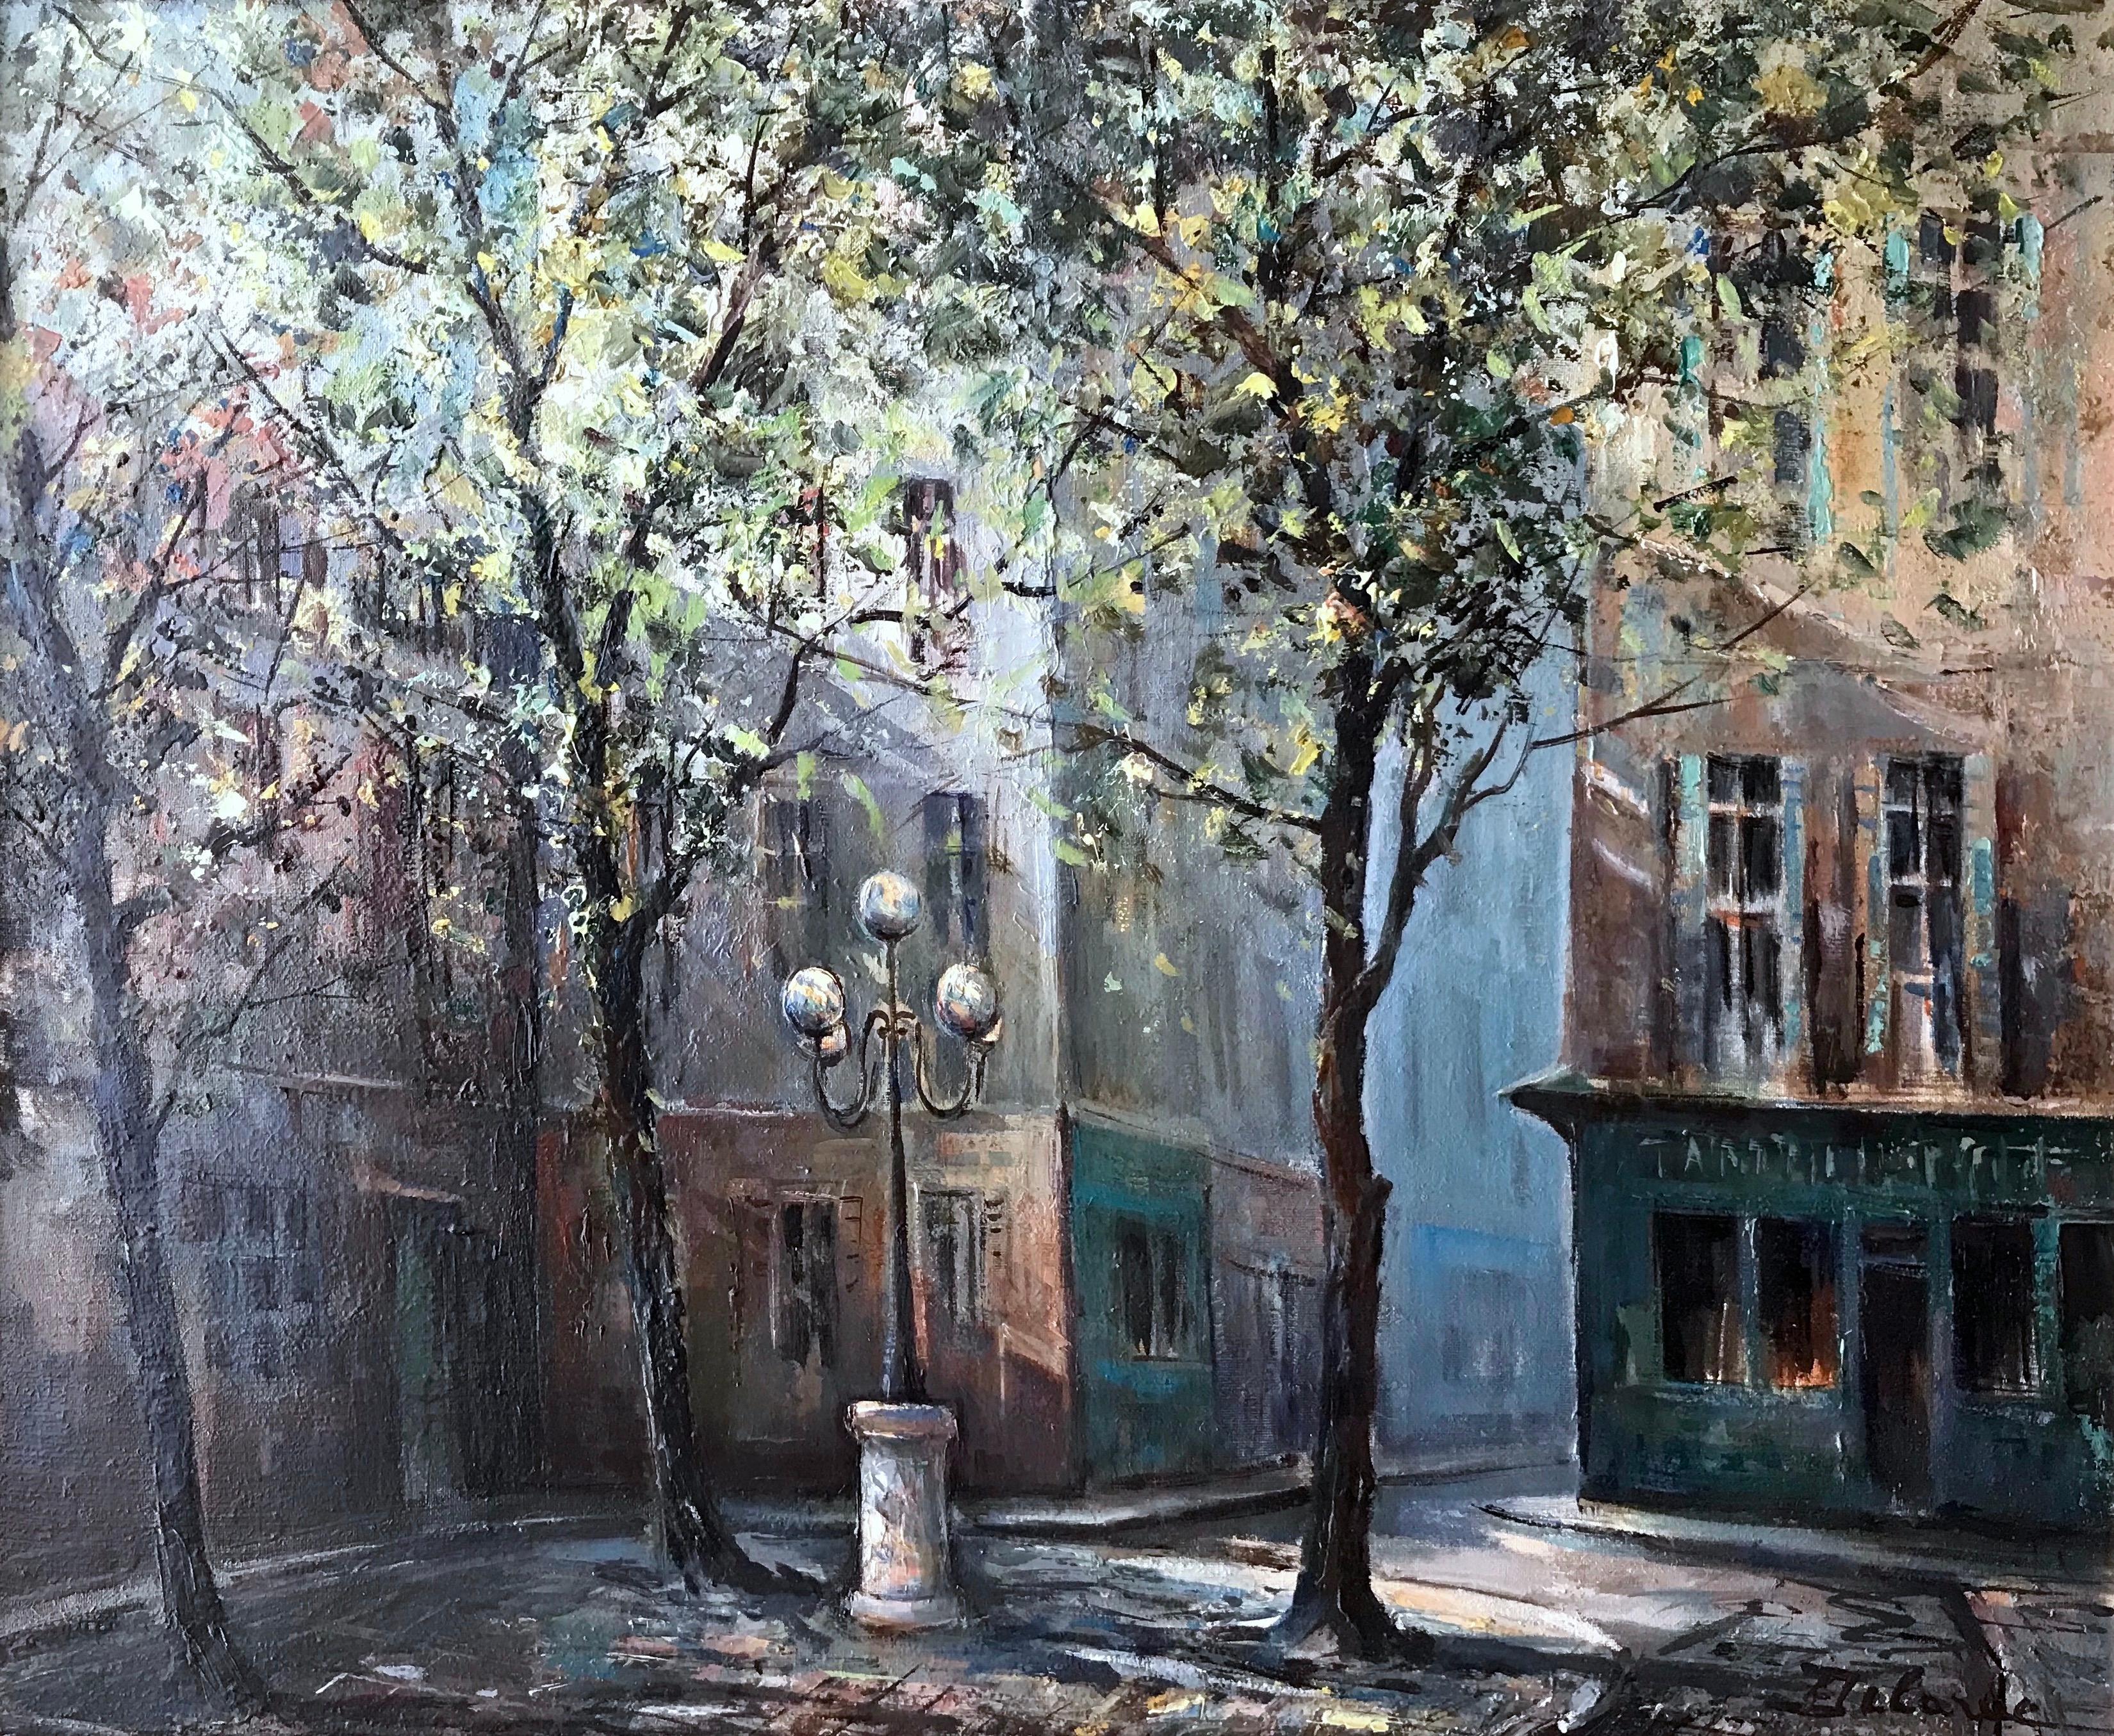 Lucien Delarue was born on November 10th, 1925 in Paris. He studied at the studios of Grande Chaumiere, Paris and was a pupil of Maitre Yves Brayer.  He is best know as a French Impressionist.  He loved to paint the streets of Paris with its